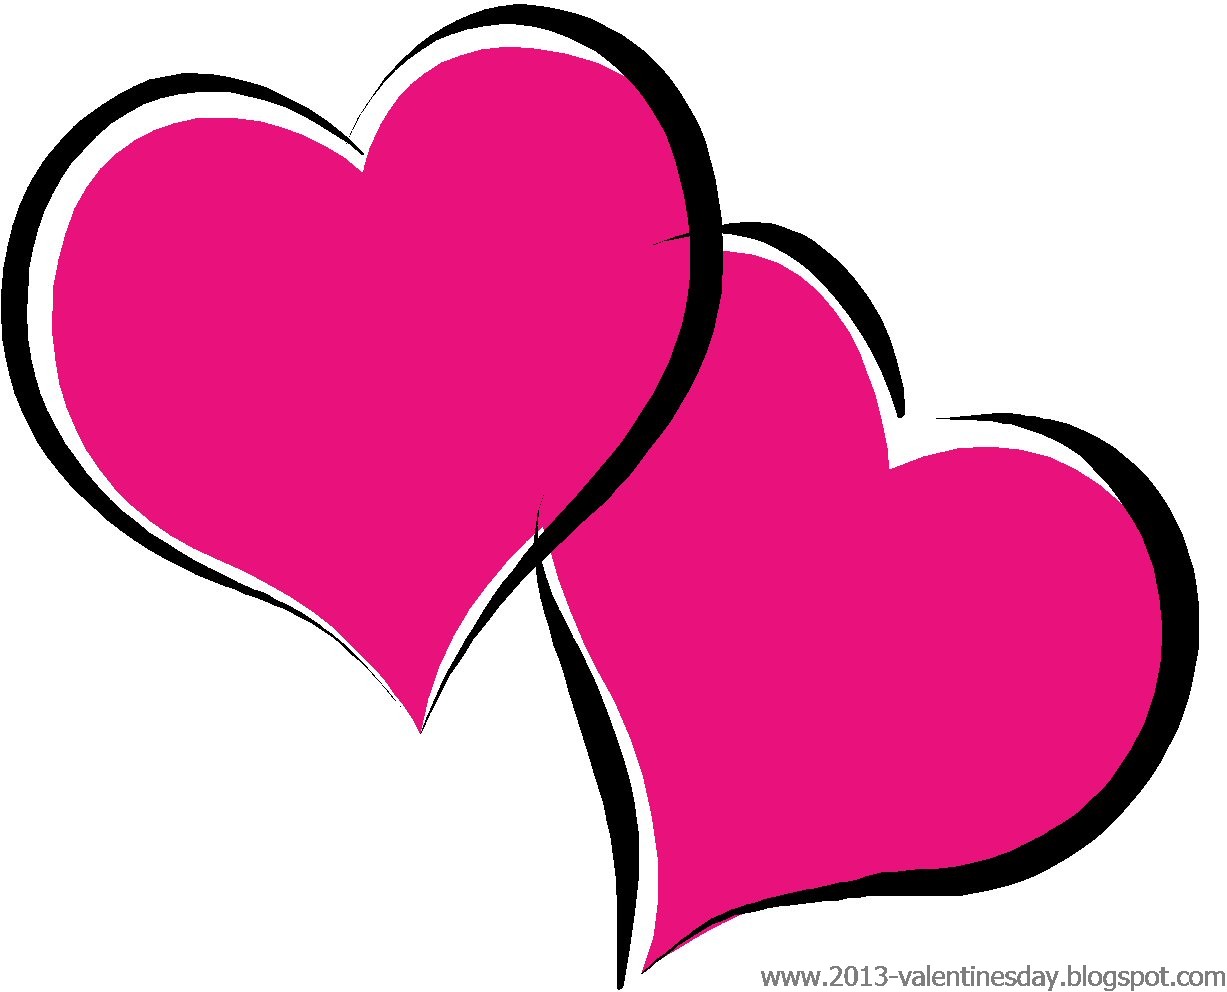 Pink Heart Clip Art For Valentines Day Greetings Card